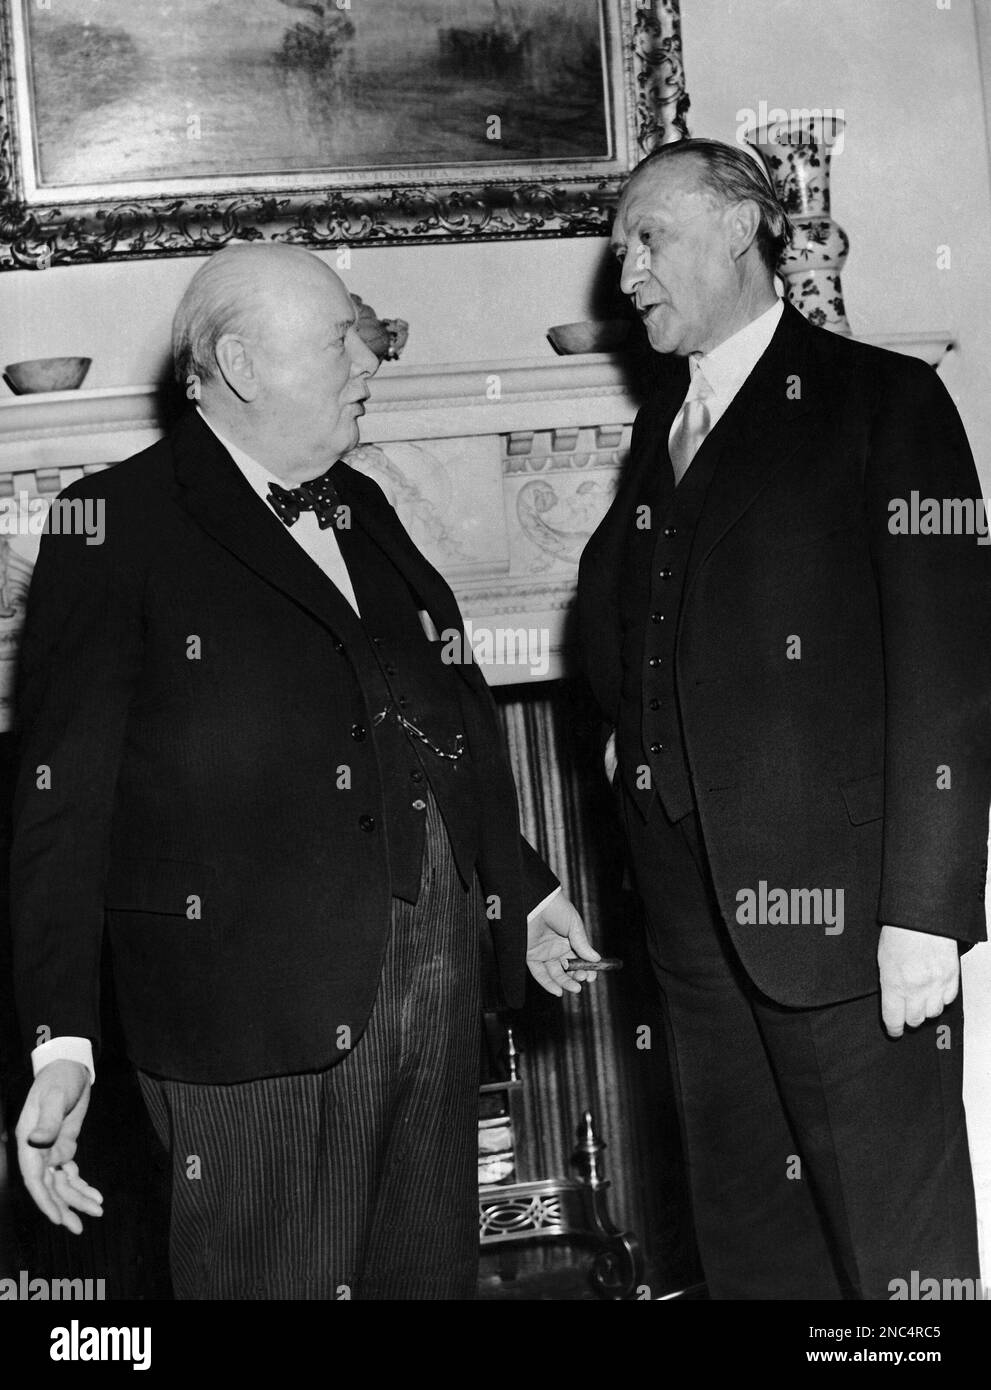 German Chancellor Konrad Adenauer talks to British Prime Minister Winston Churchill, at left holding a cigar, after breakfast during his visit to No. 10 Downing Street, London, United Kingdom on December 4, 1951. (AP Photo) Stock Photo